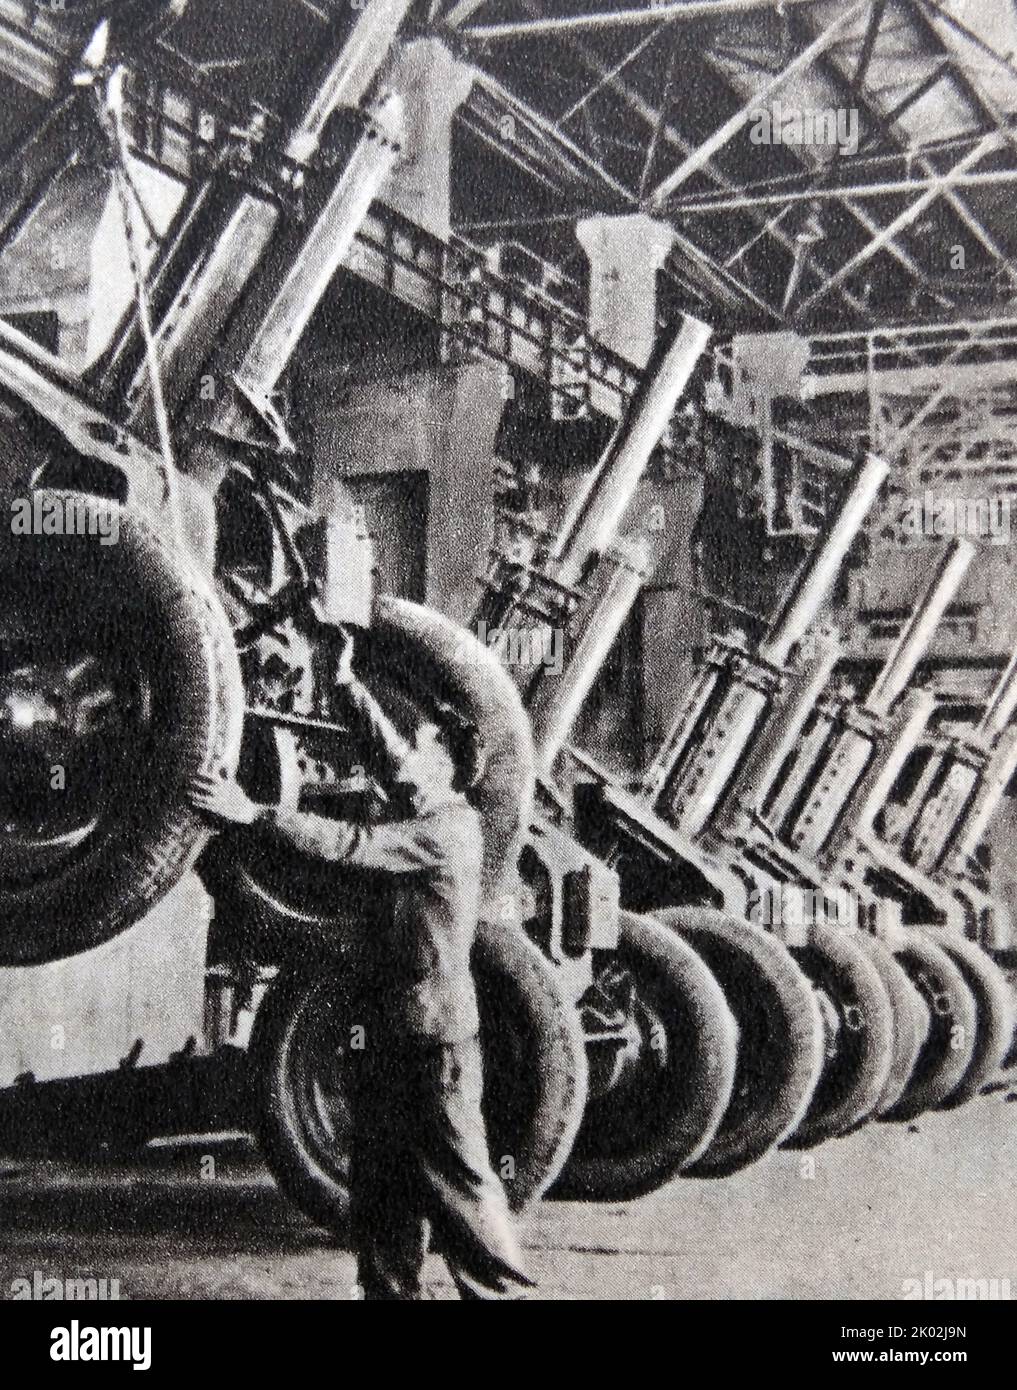 War equipment manufacturing during the Great patriotic war in the USSR Stock Photo